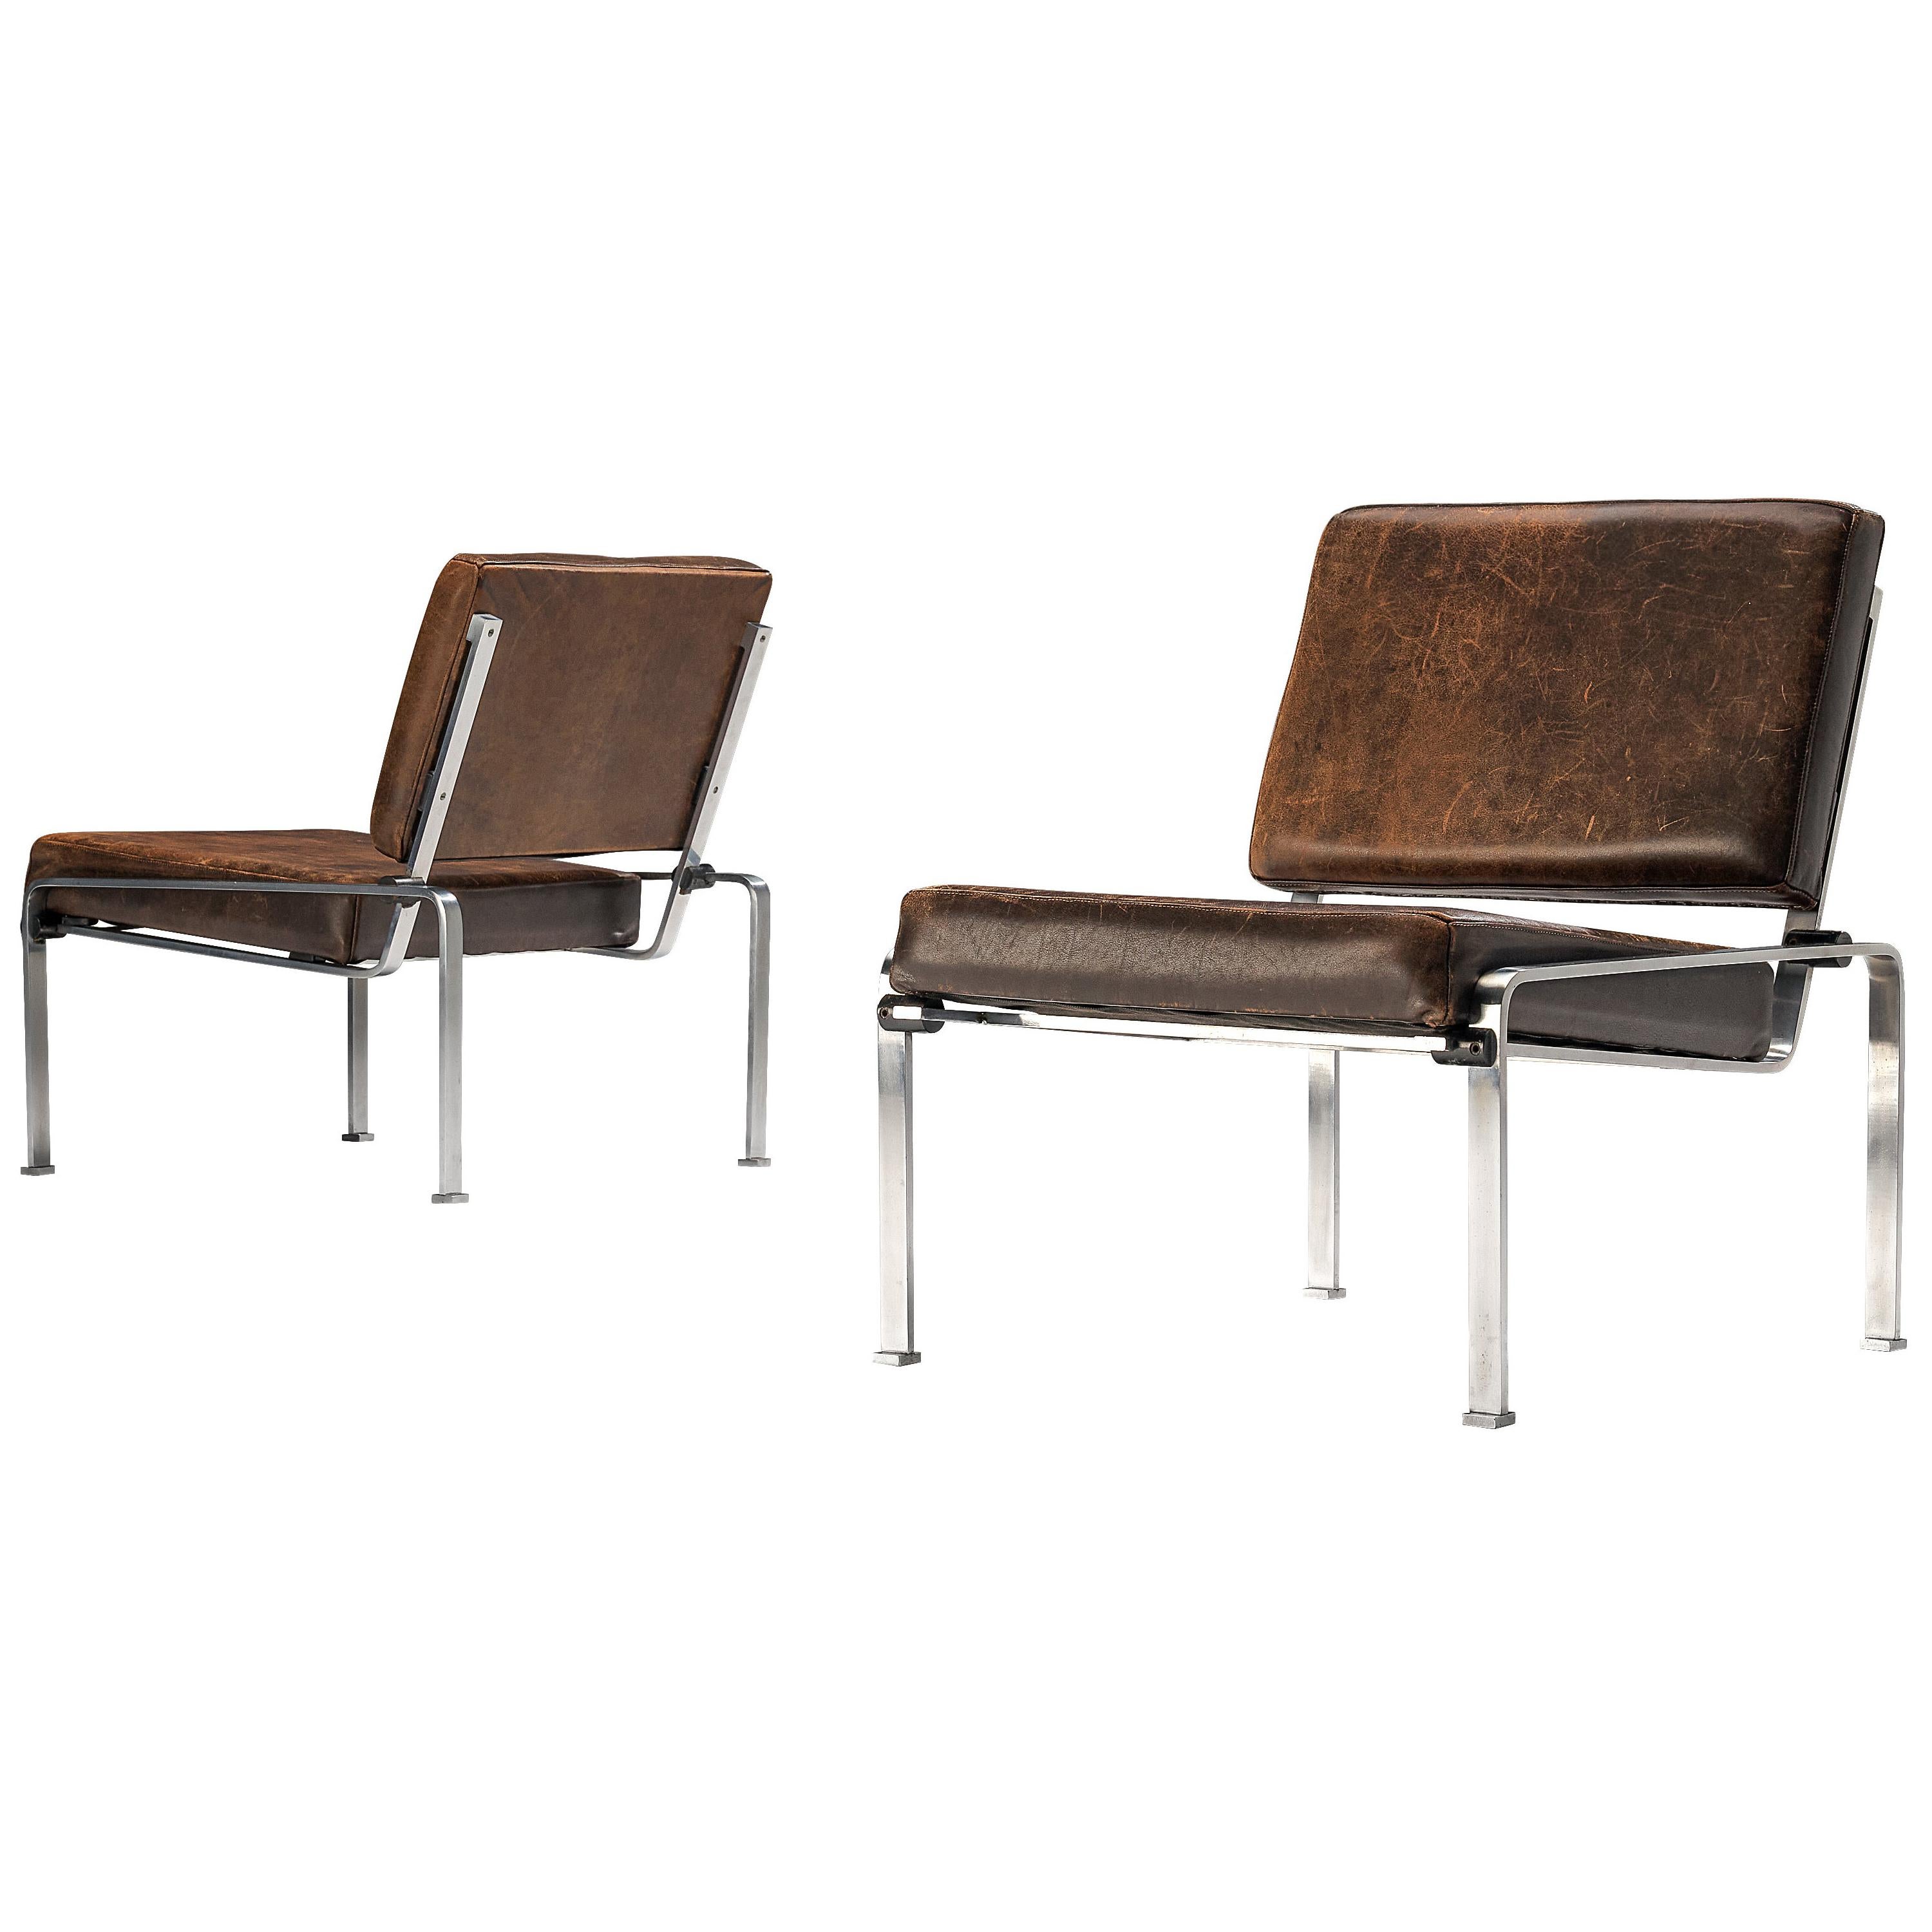 Pair of Lounge Chairs in Patinated Brown Leather and Chromed Frame